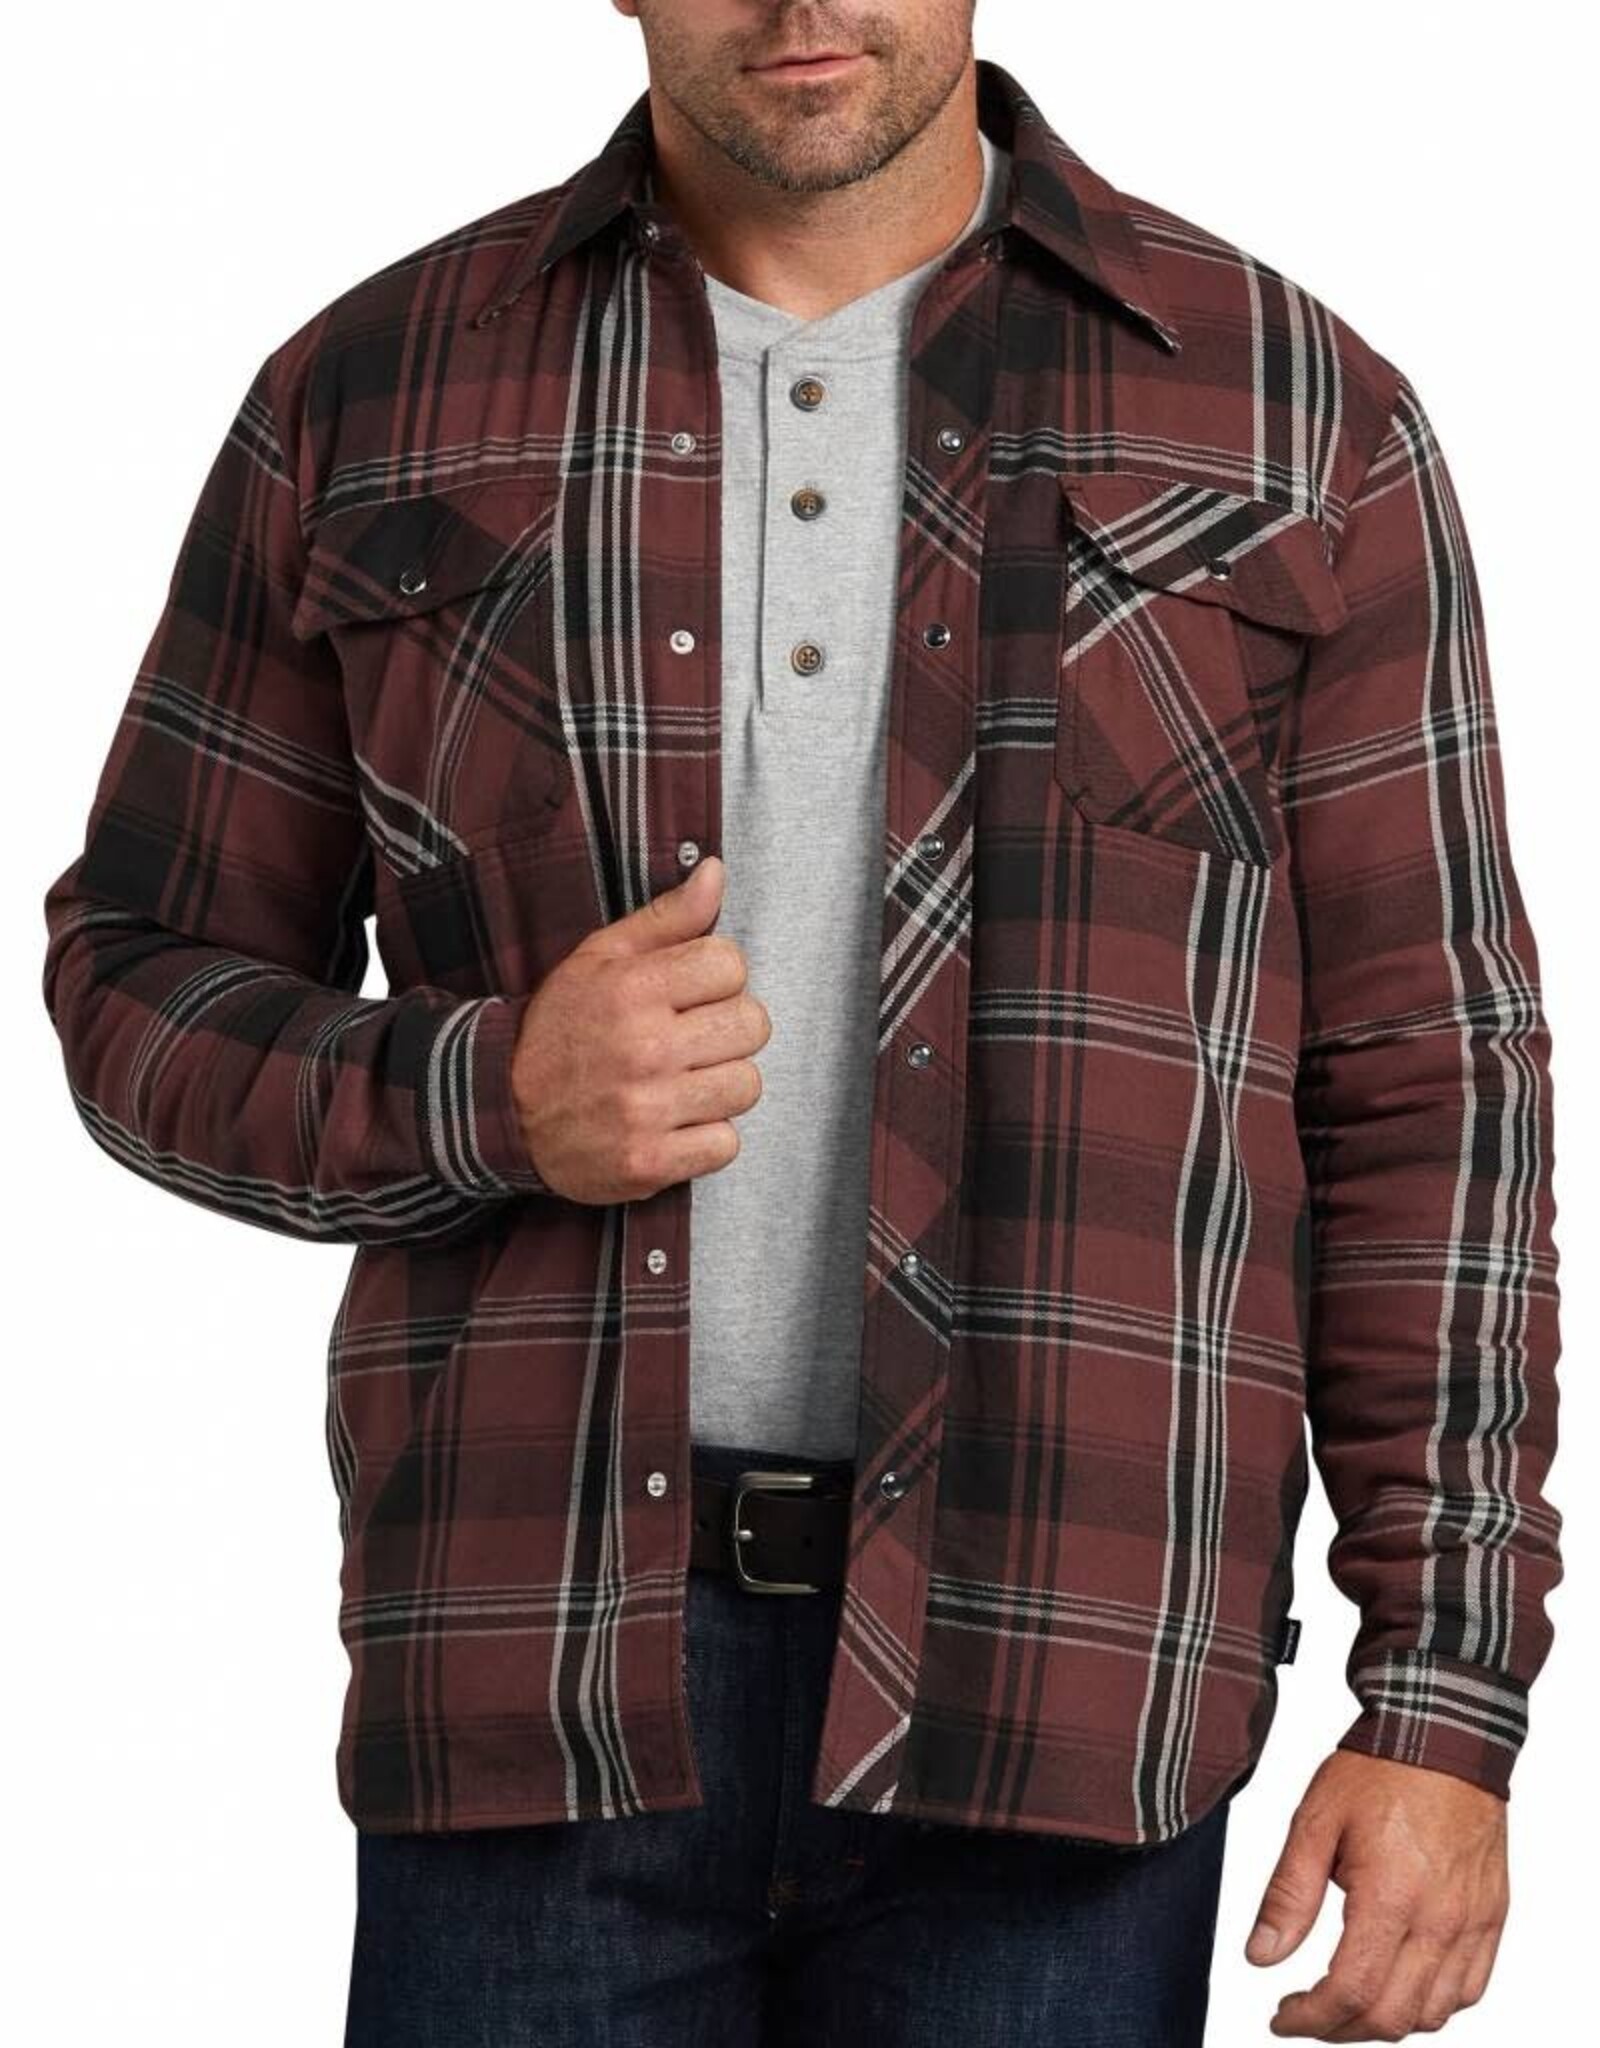 DICKIES Sherpa Lined Snap Front Jacket Cave/Black Plaid - TJ200PVL